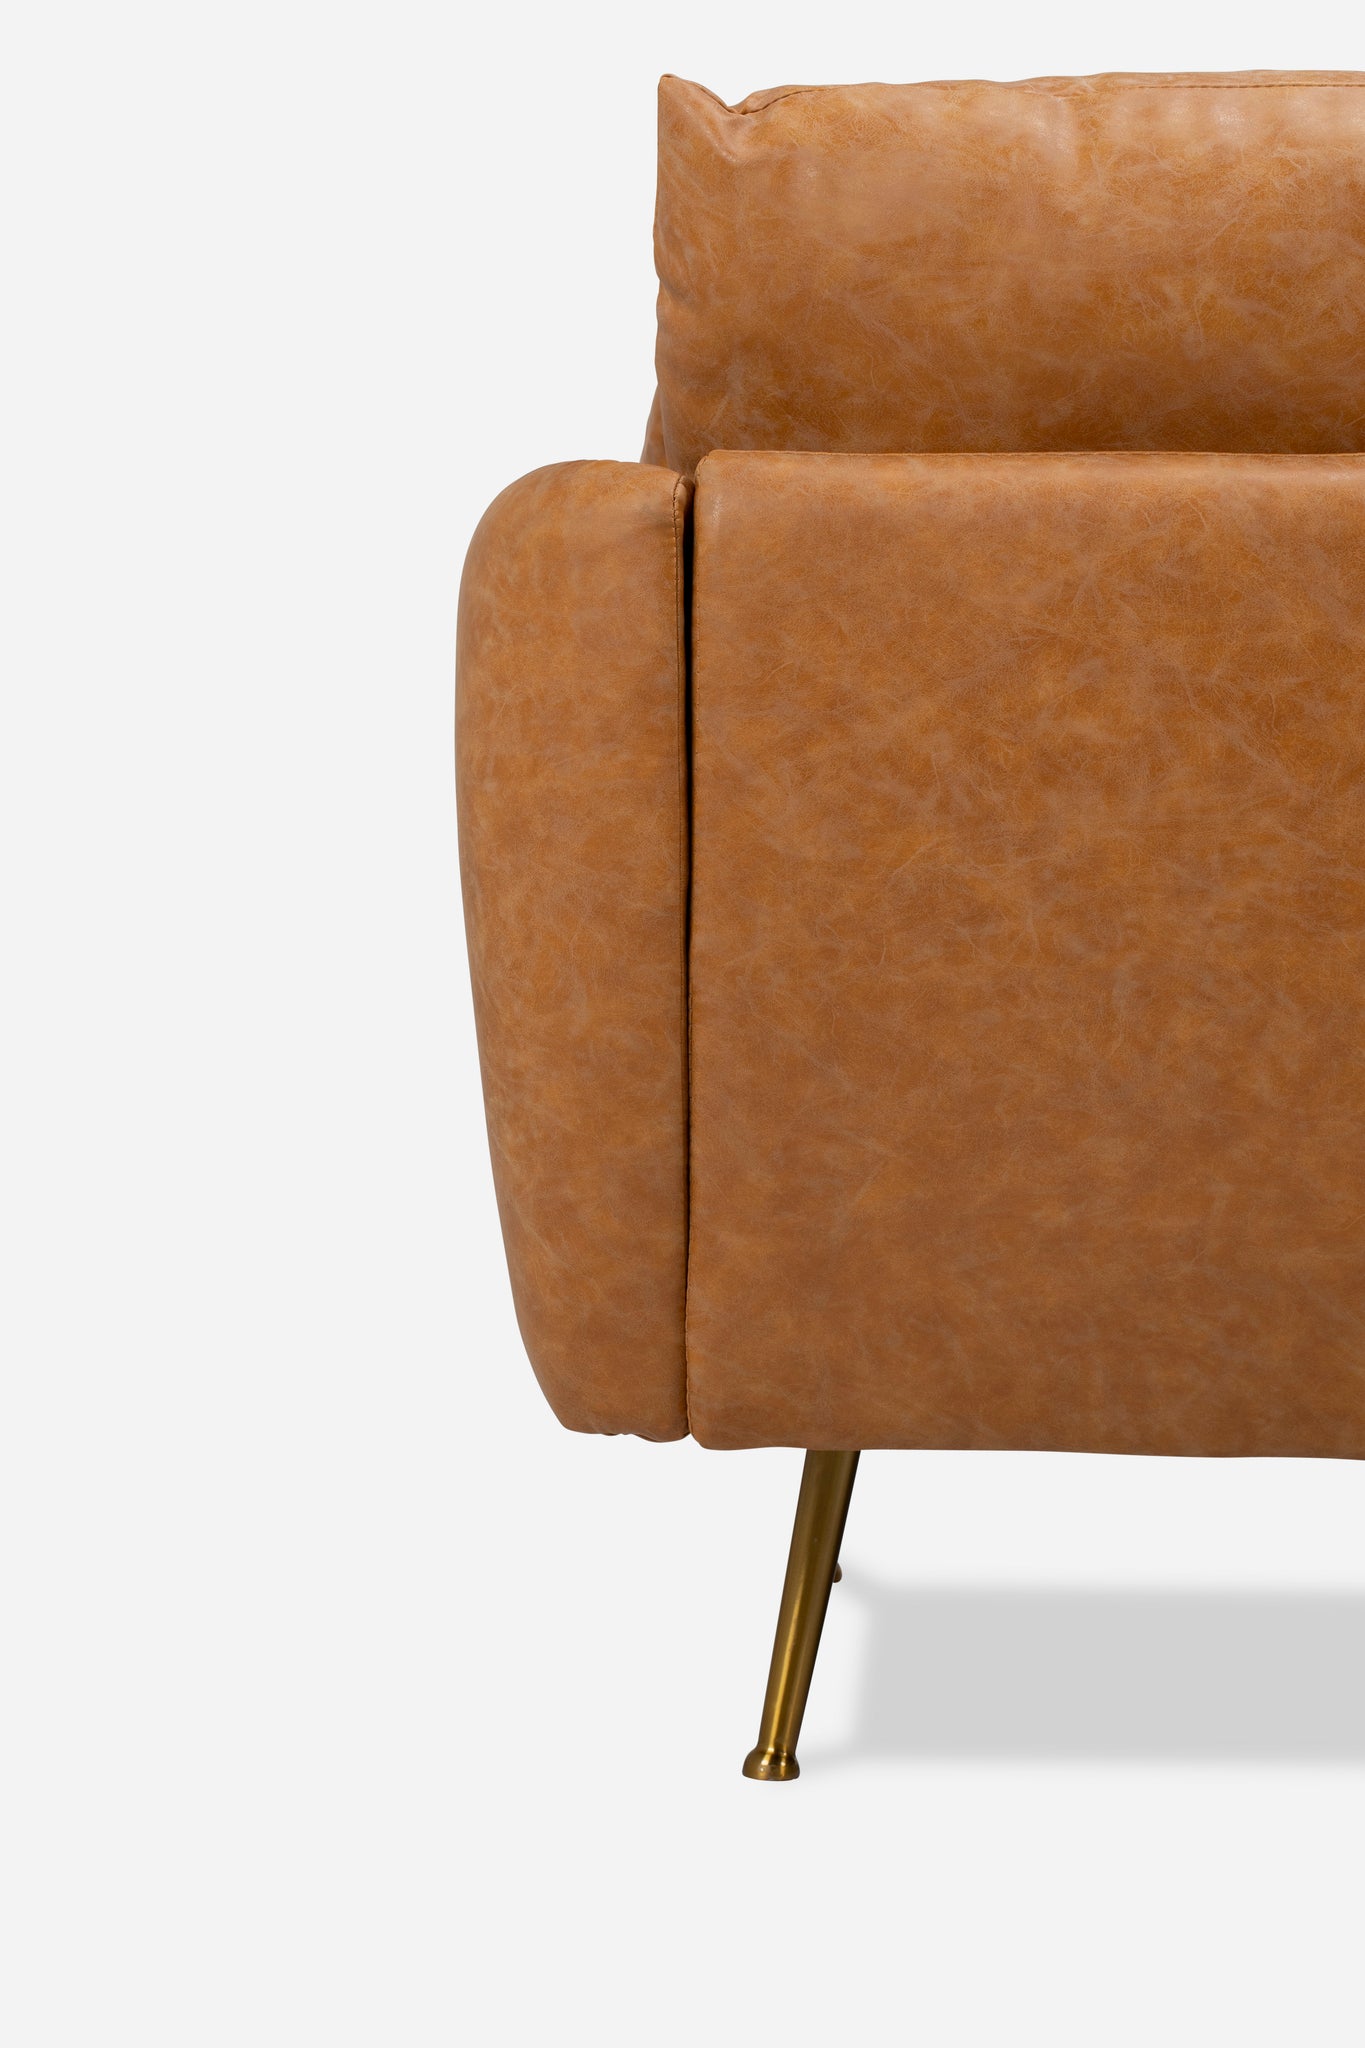 park armchair shown in distressed vegan leather with gold legs